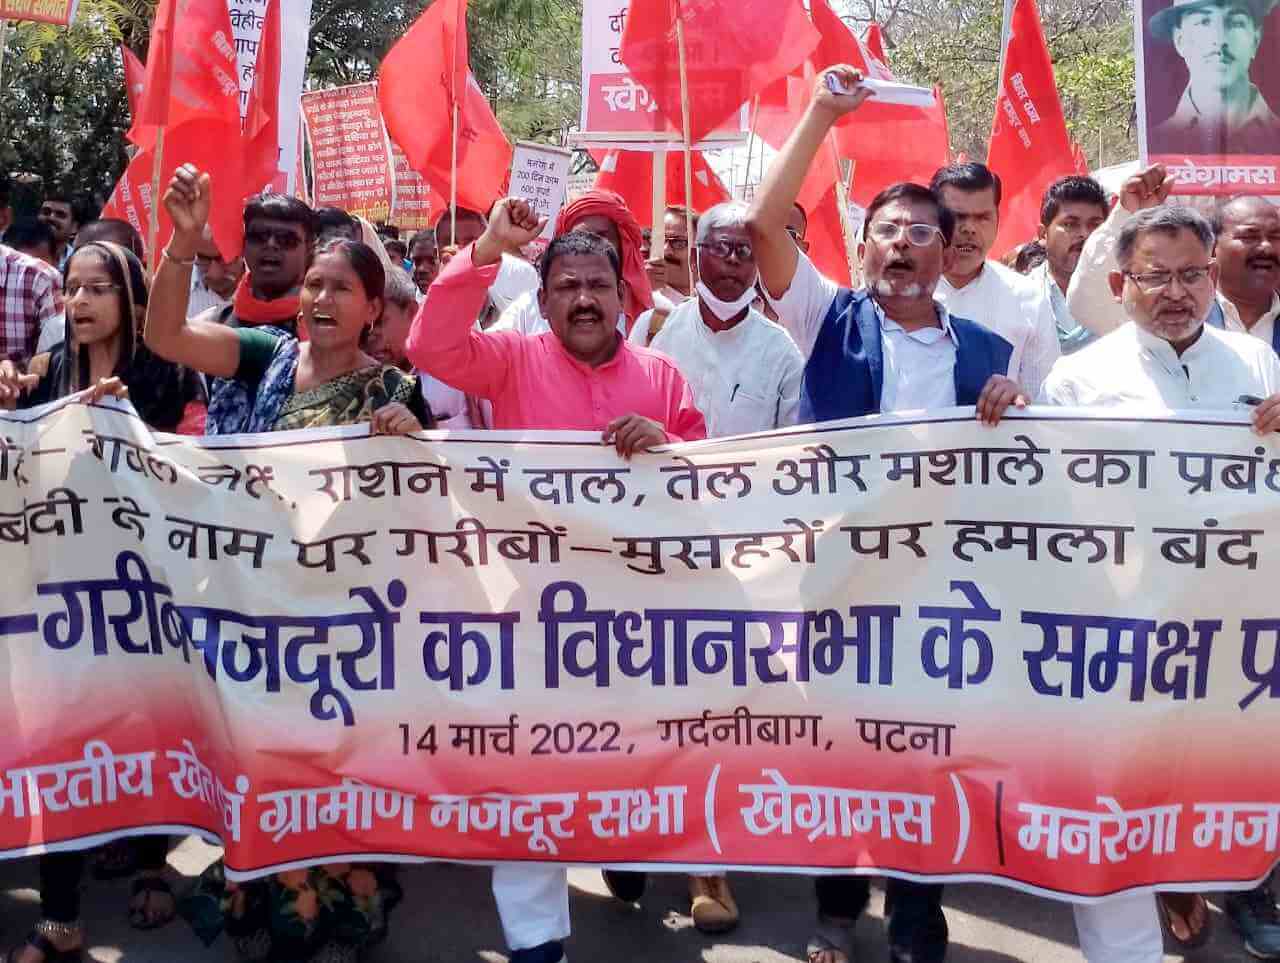 Bihar’s Poor Protest The Government “Bulldozer” Eviction Plans